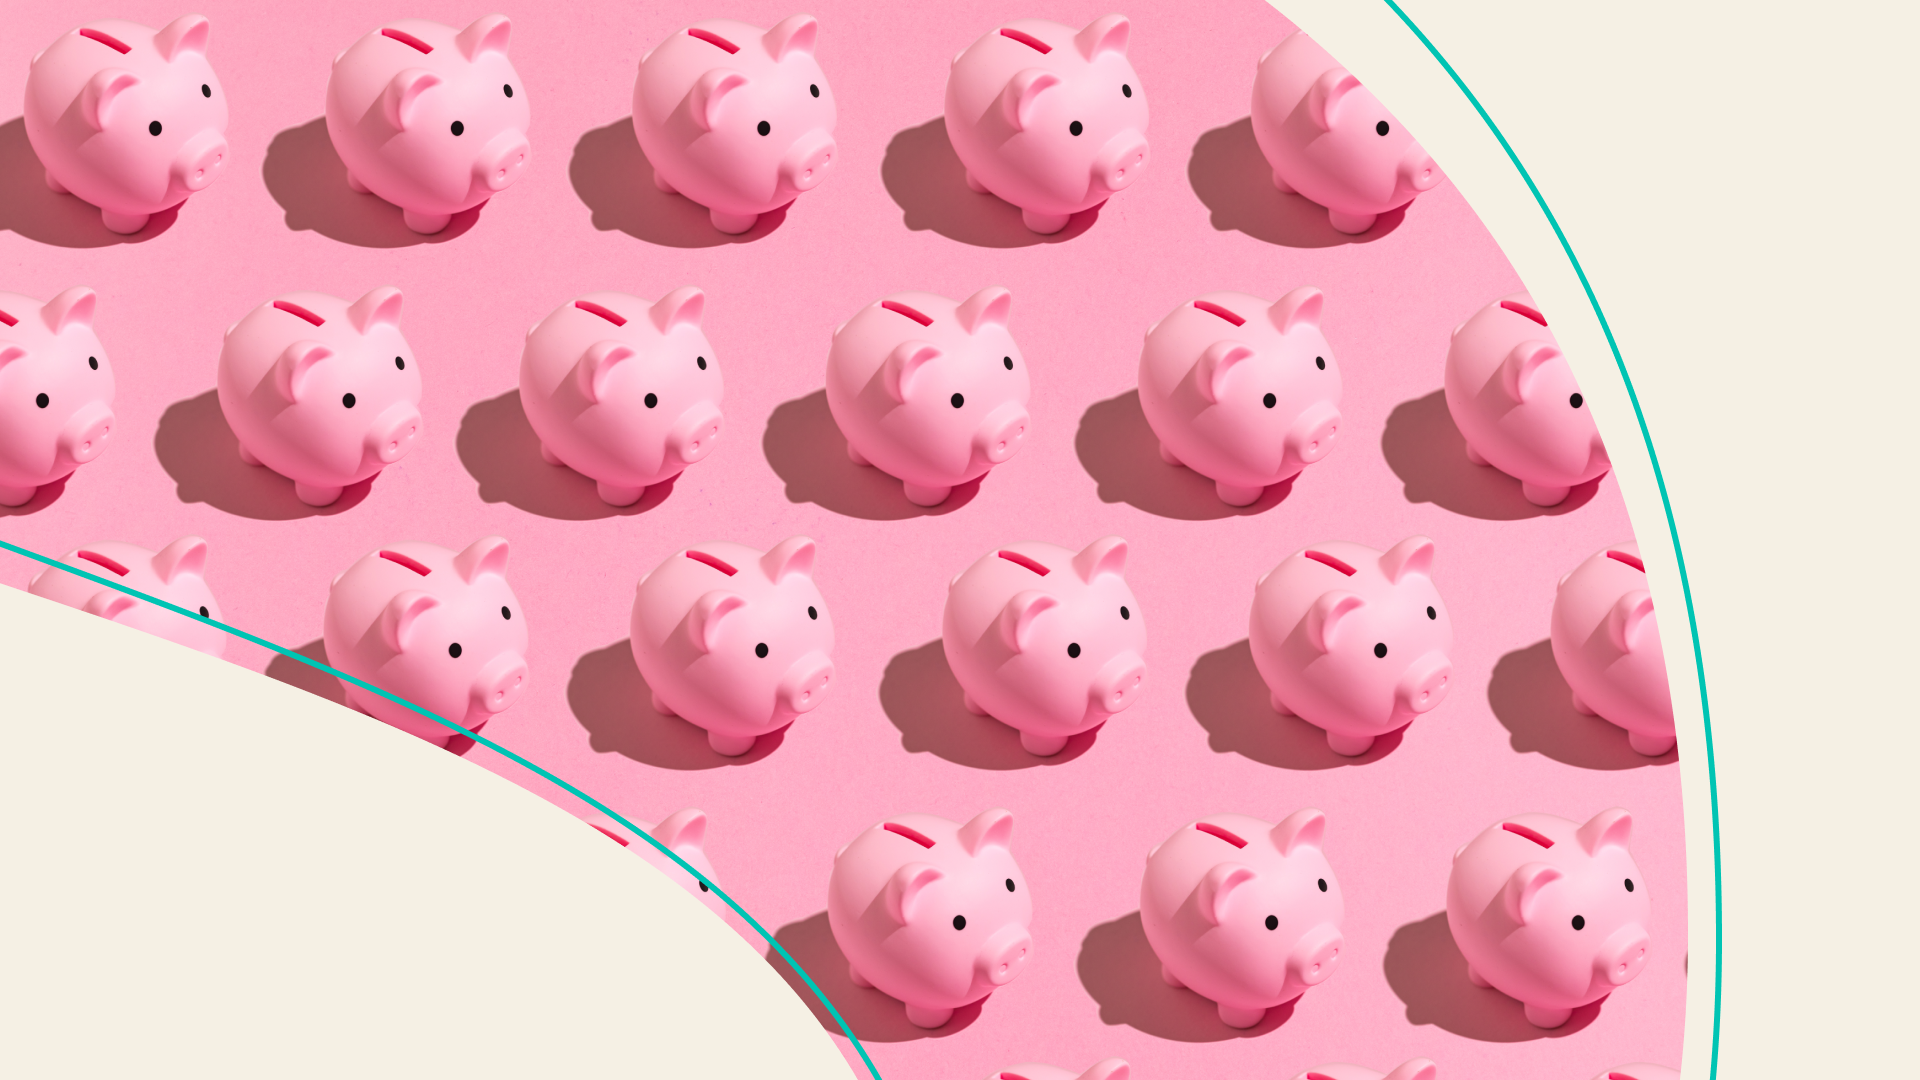 Pattern of pink piggy bank with black eyes on pink background. 